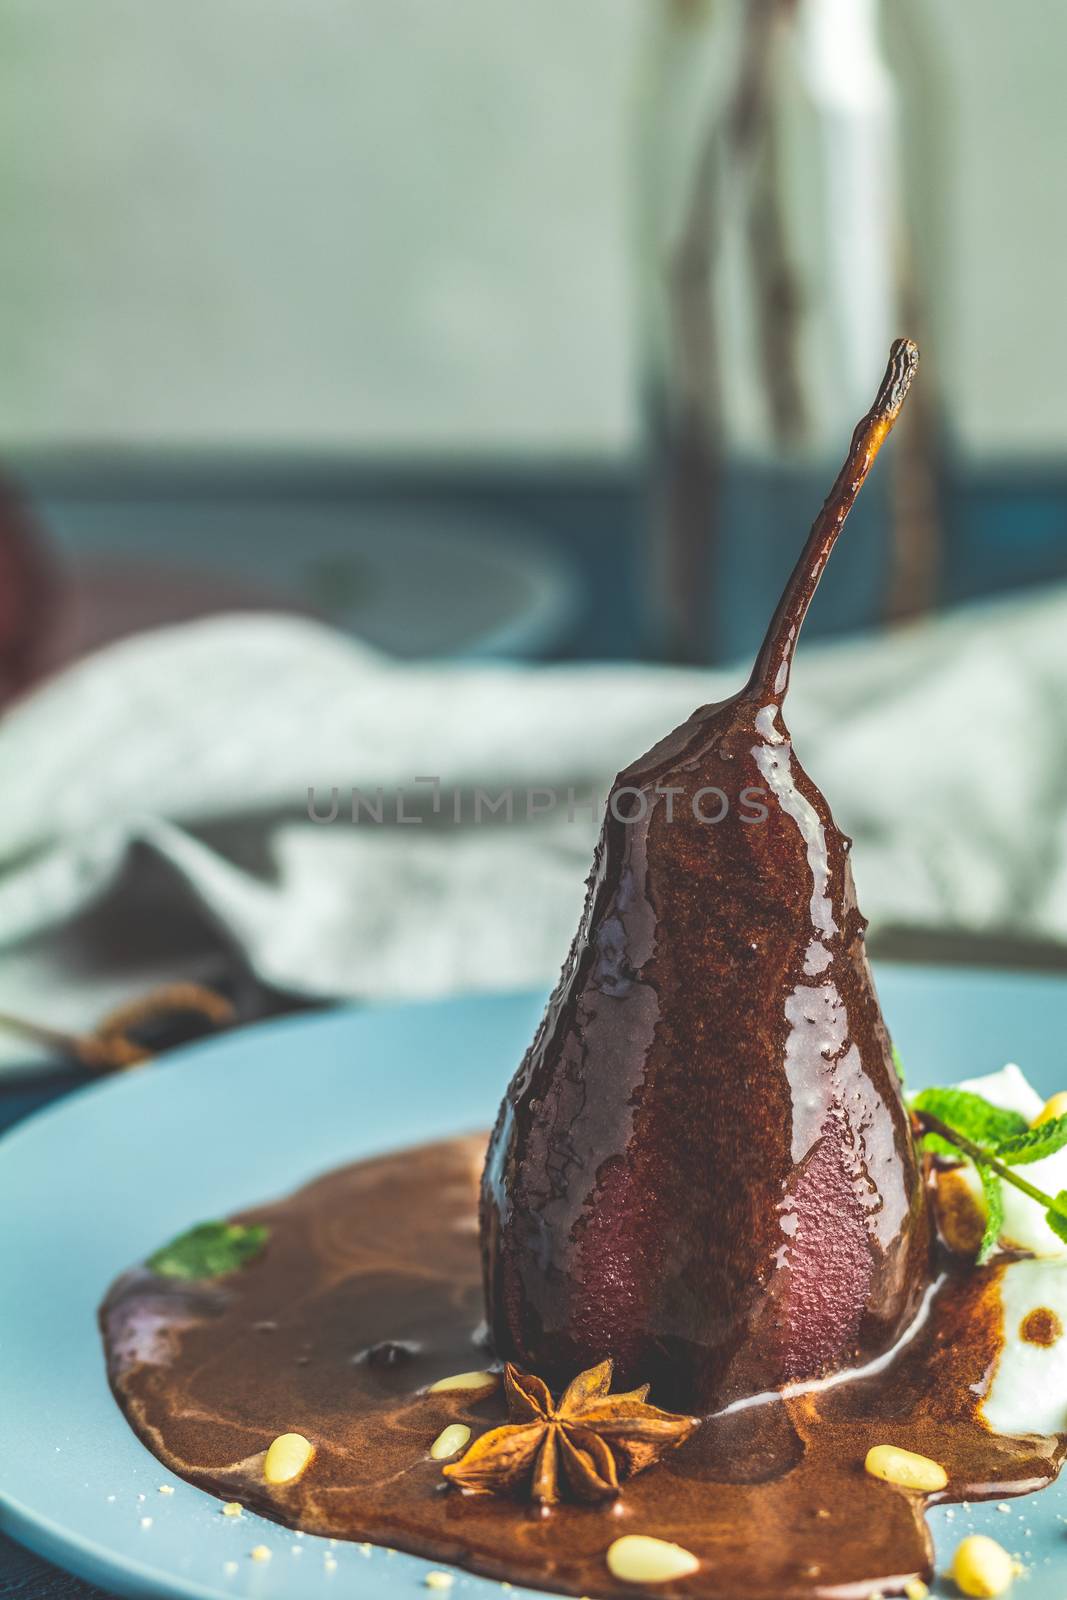 Traditional dessert pears stewed in red wine with chocolate sauc by ArtSvitlyna